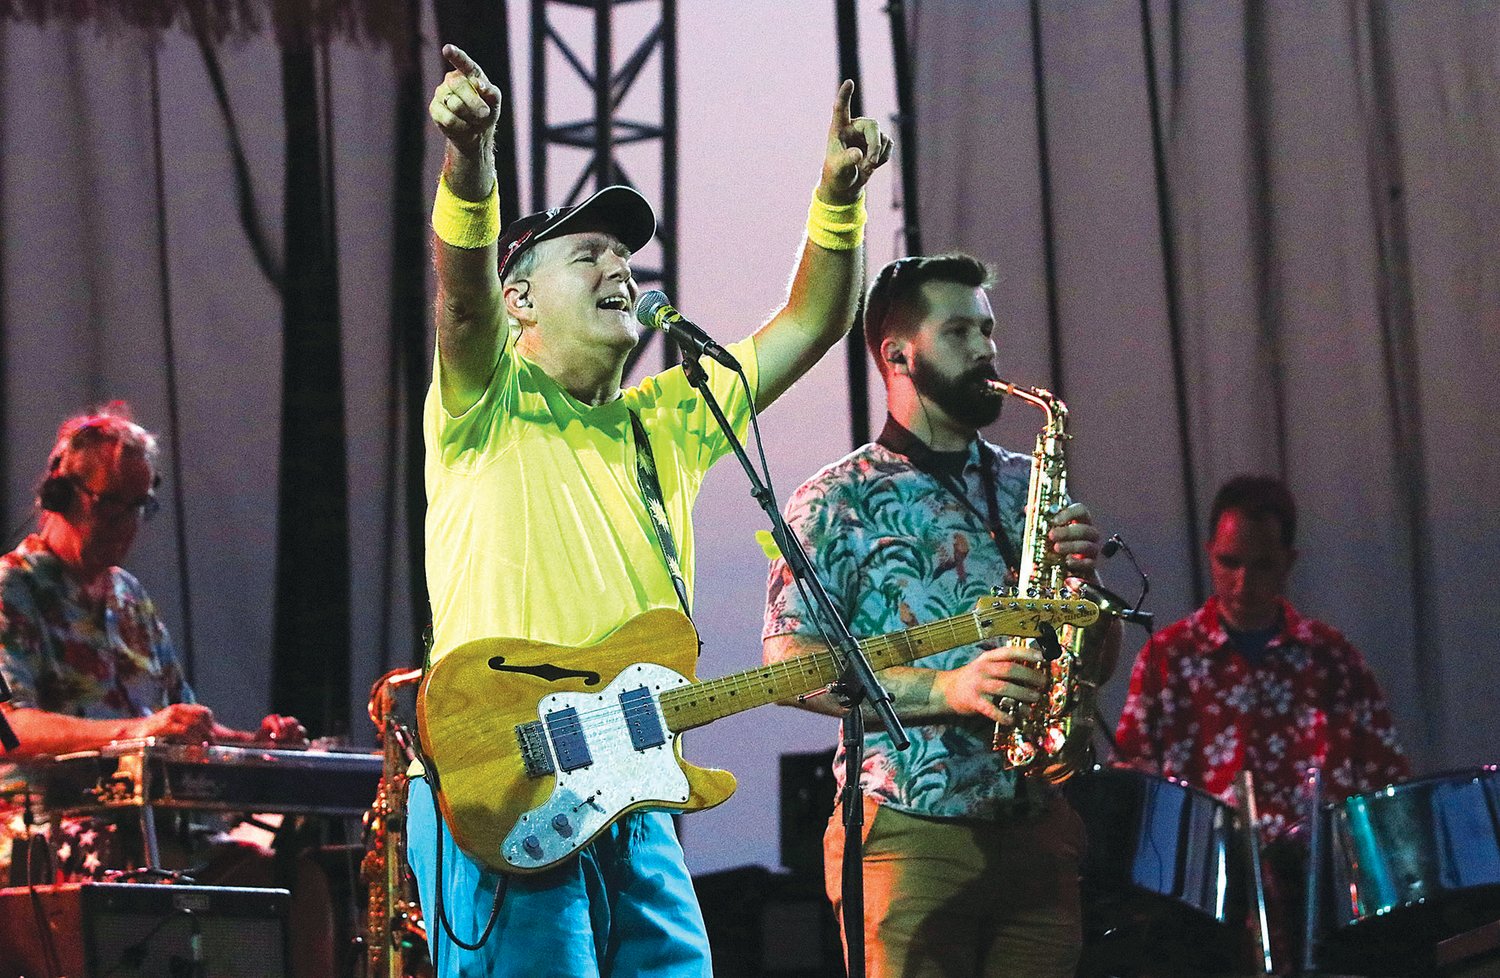 Changes in Latitude, a Jimmy Buffet tribute band, will perform on Sunday, June 26.